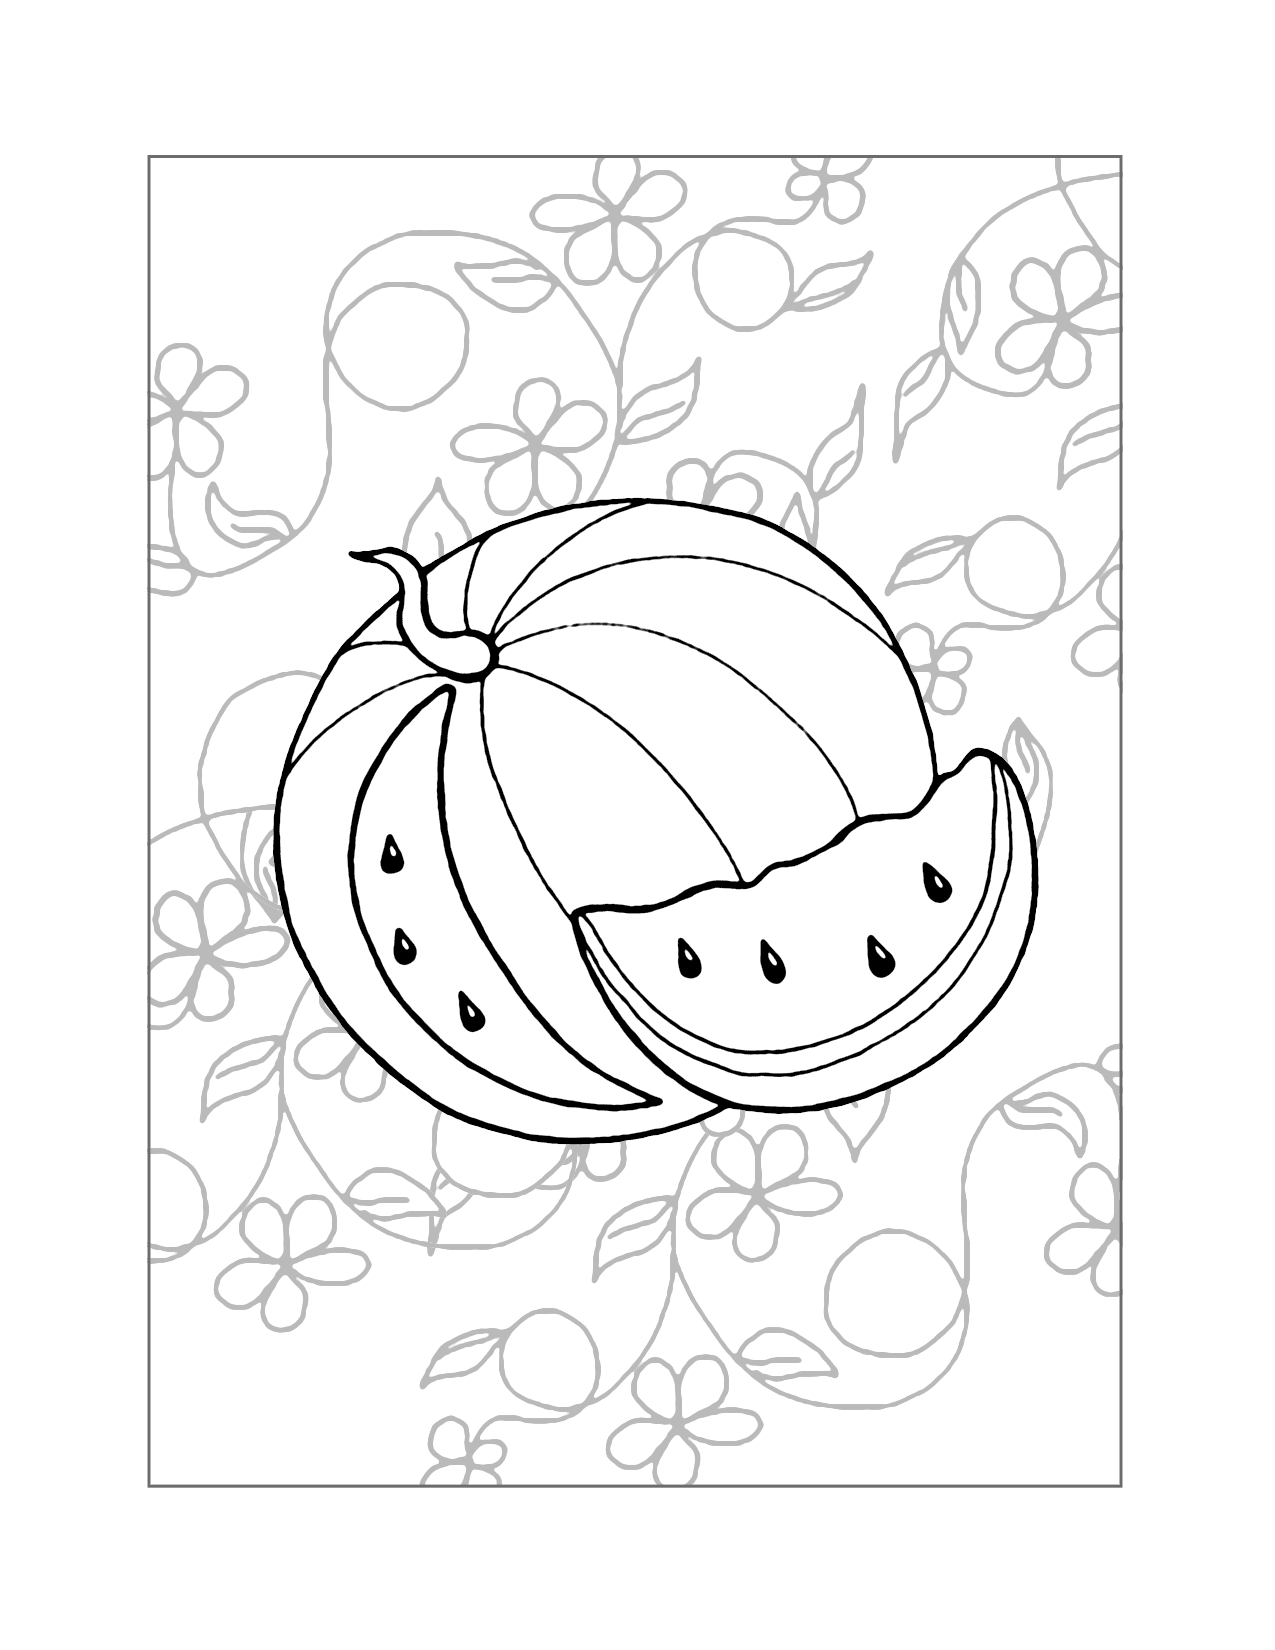 Watermelon Vines Coloring Page